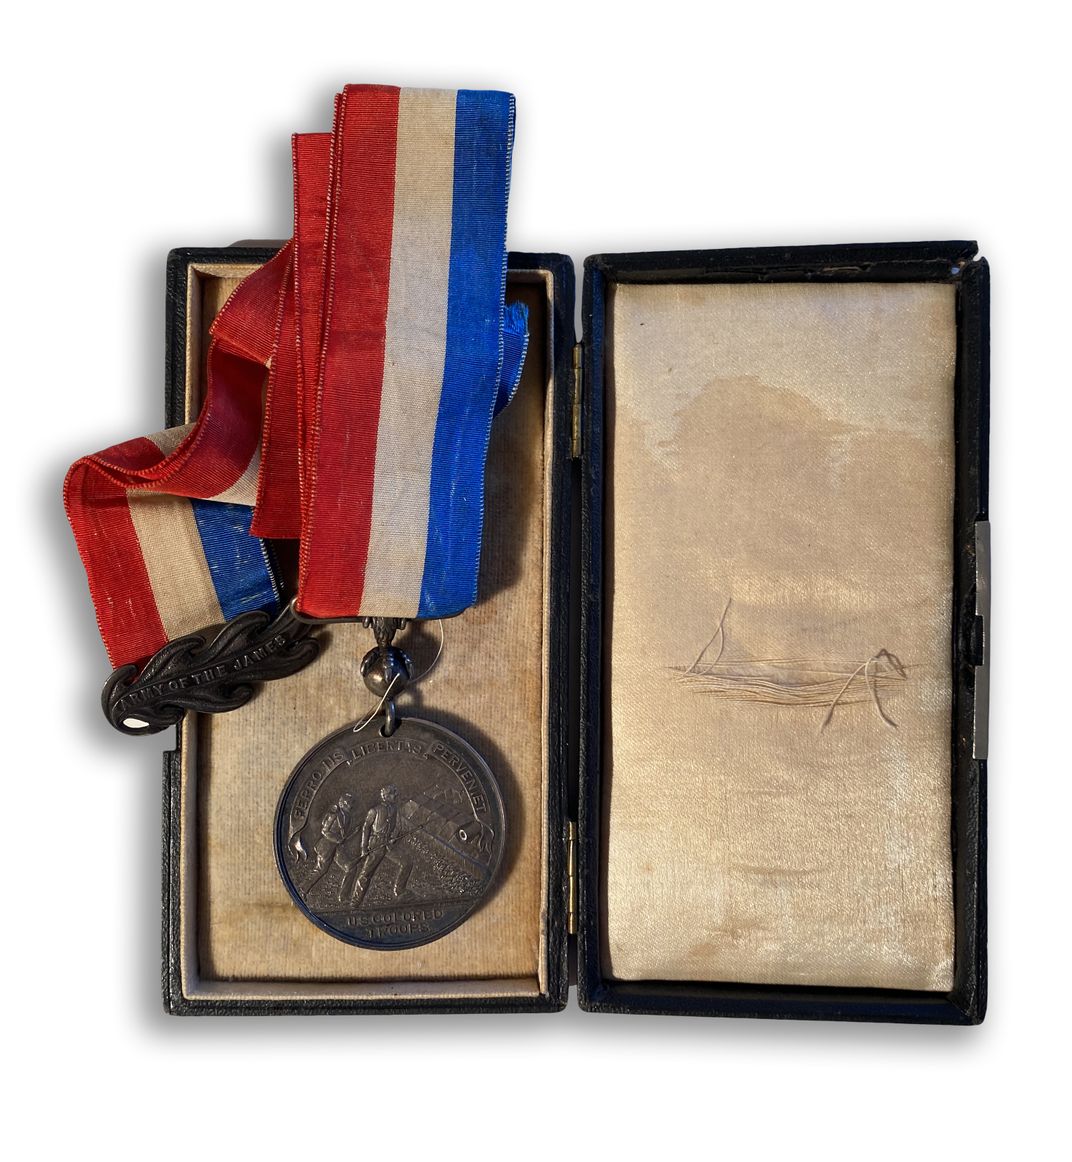 A medal given to Black Civil War soldiers by Union General Benjamin F. Butler